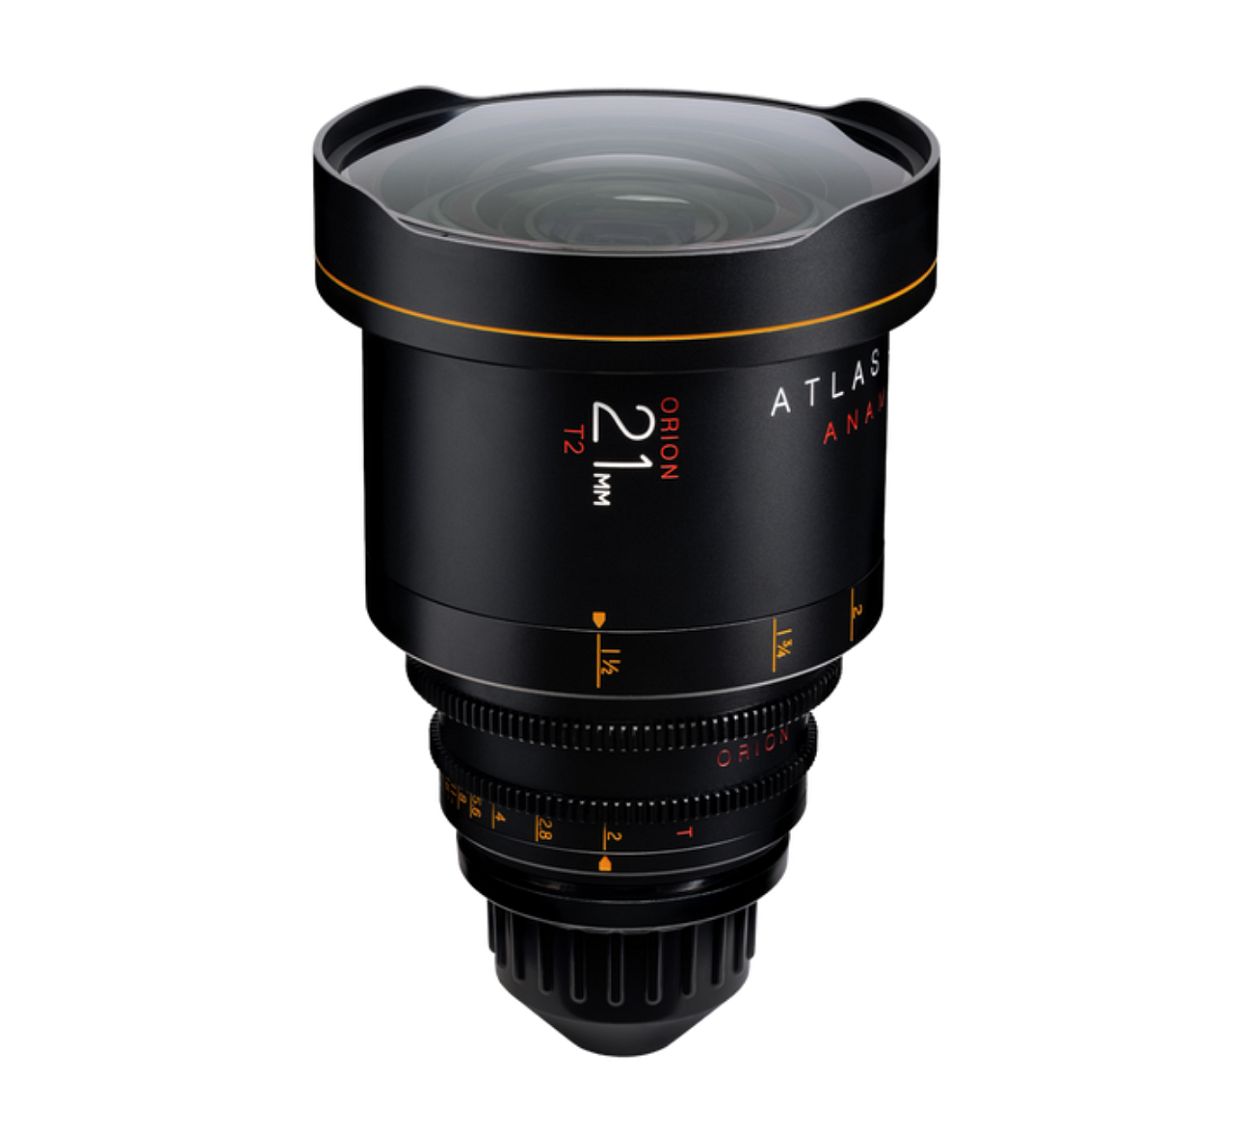 ORION Series 2x anamorphic T2.0 21mm